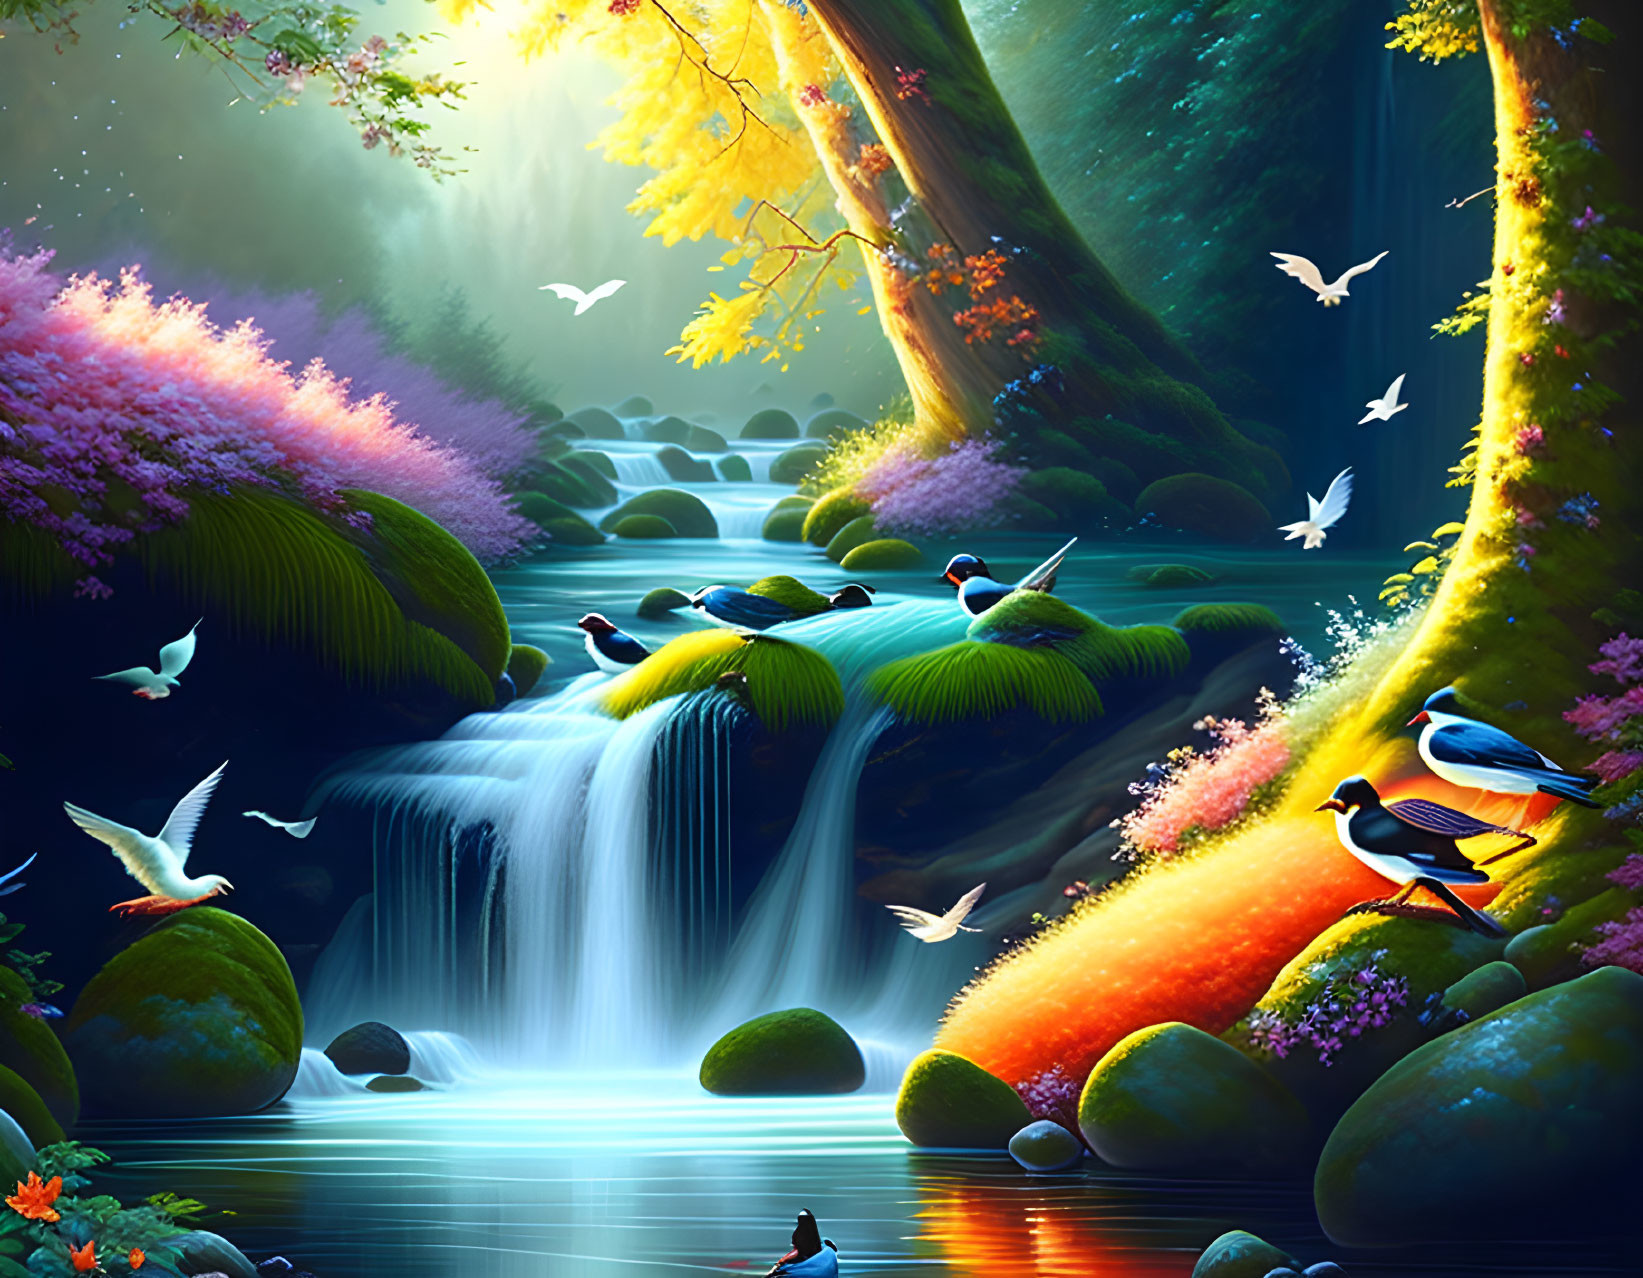 Serene forest scene with waterfall, birds, and river